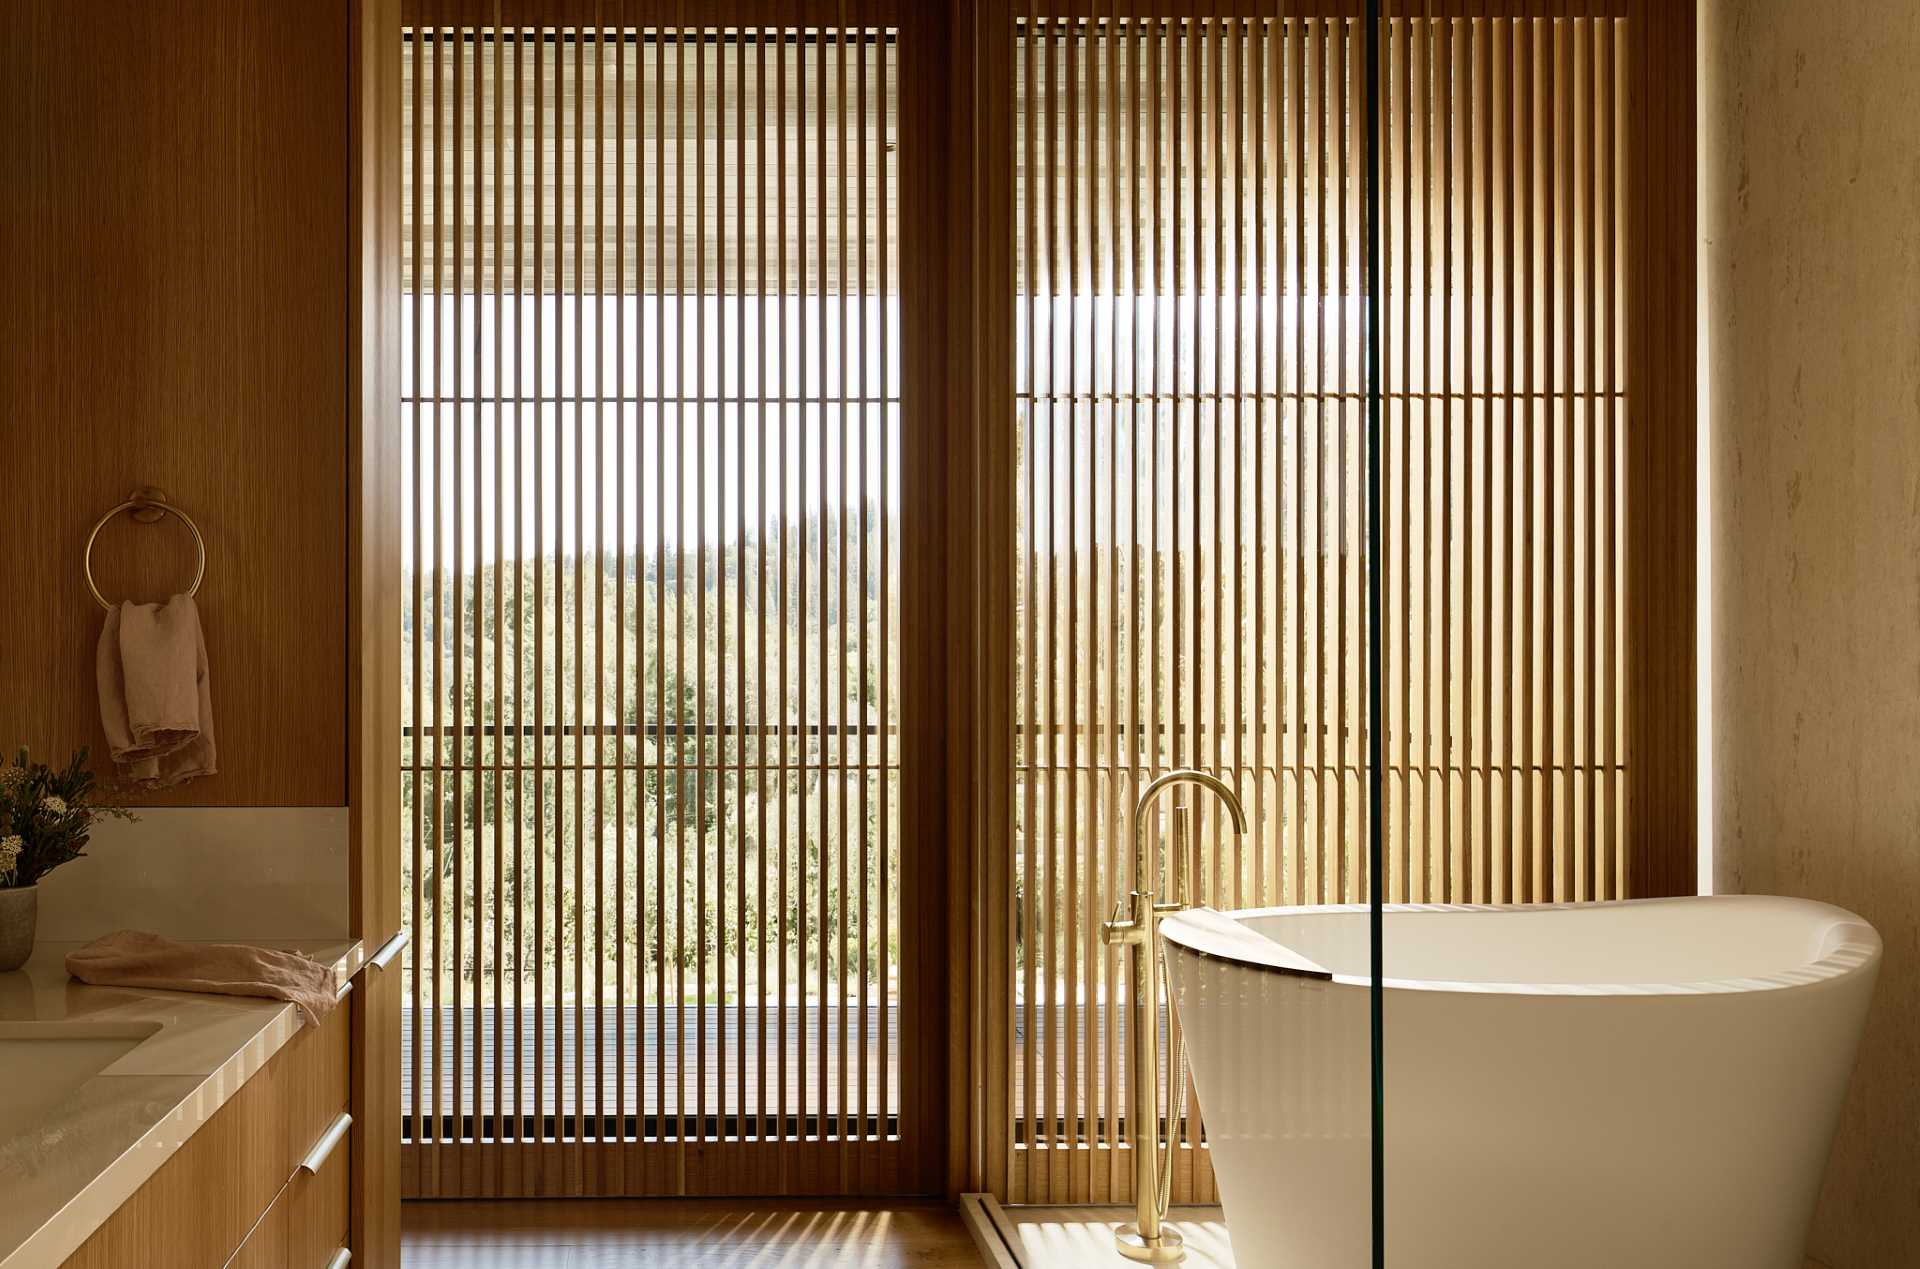 In this bathroom, a freestanding bathtub is positioned in front of the windows, while wood slats provide privacy.